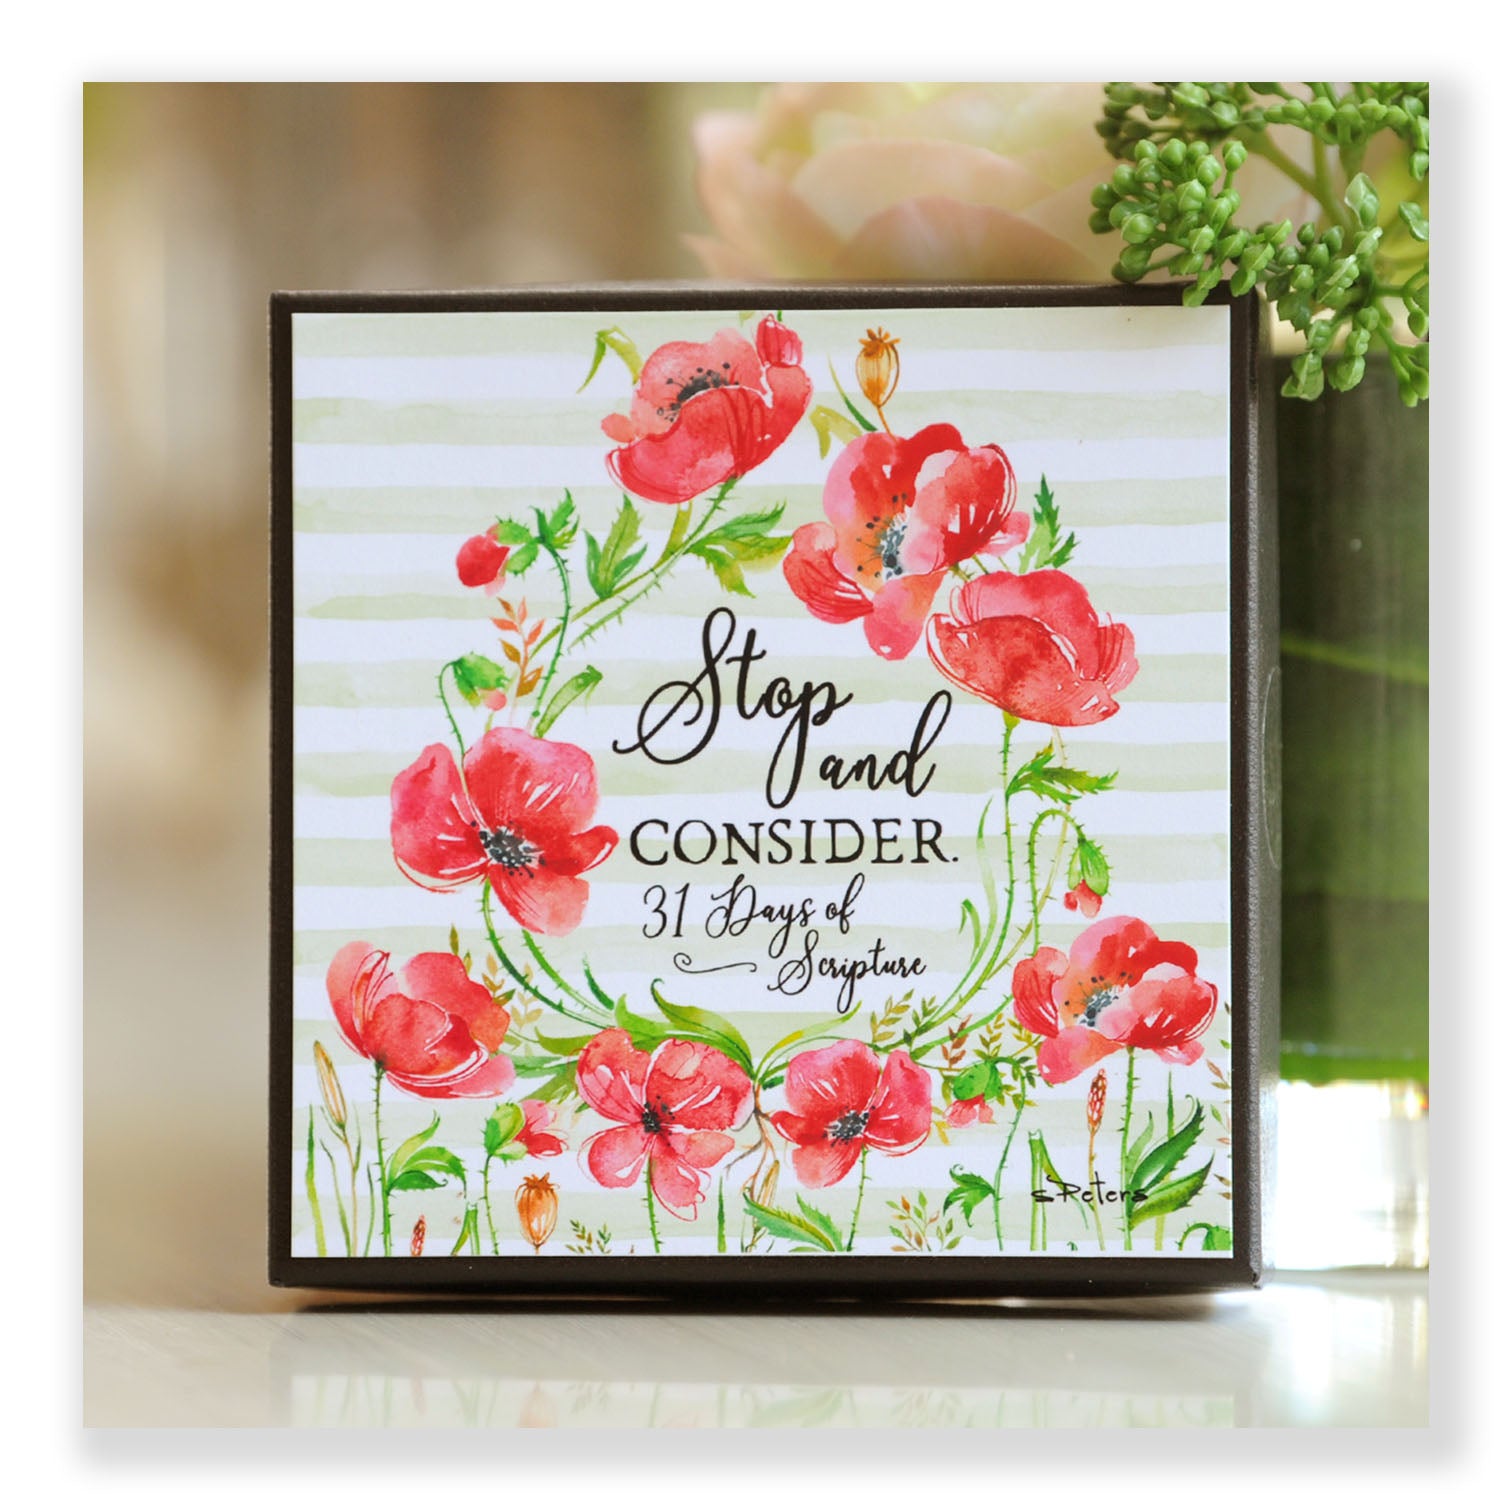 Stop and Consider - 31 Days of Scripture - Boxed Mini Print Collection